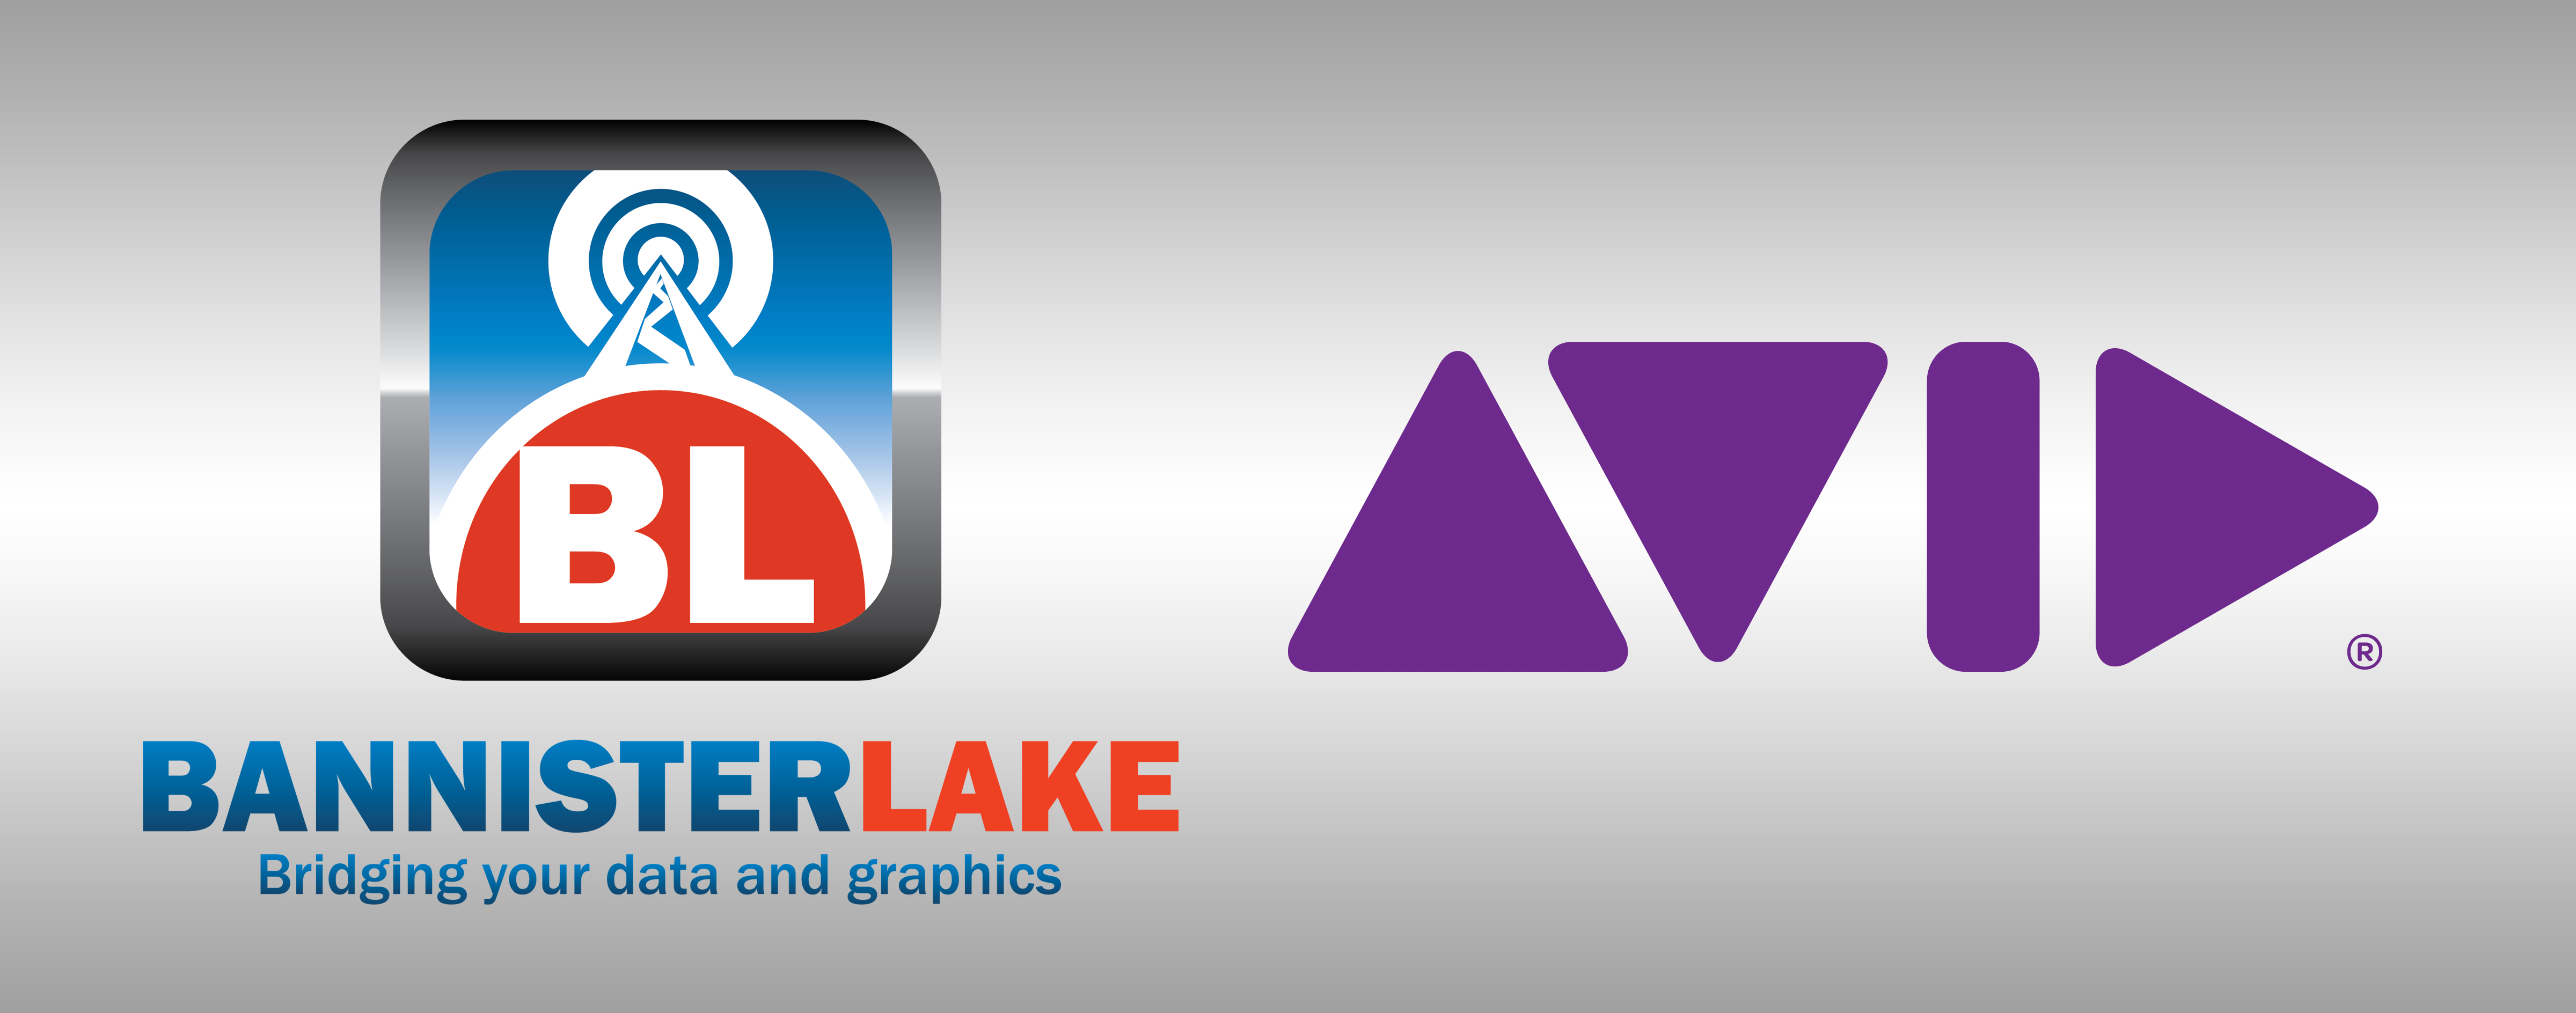 Sales And Distribution Agreement Avid And Bannister Lake Enter Into Sales And Distribution Agreement